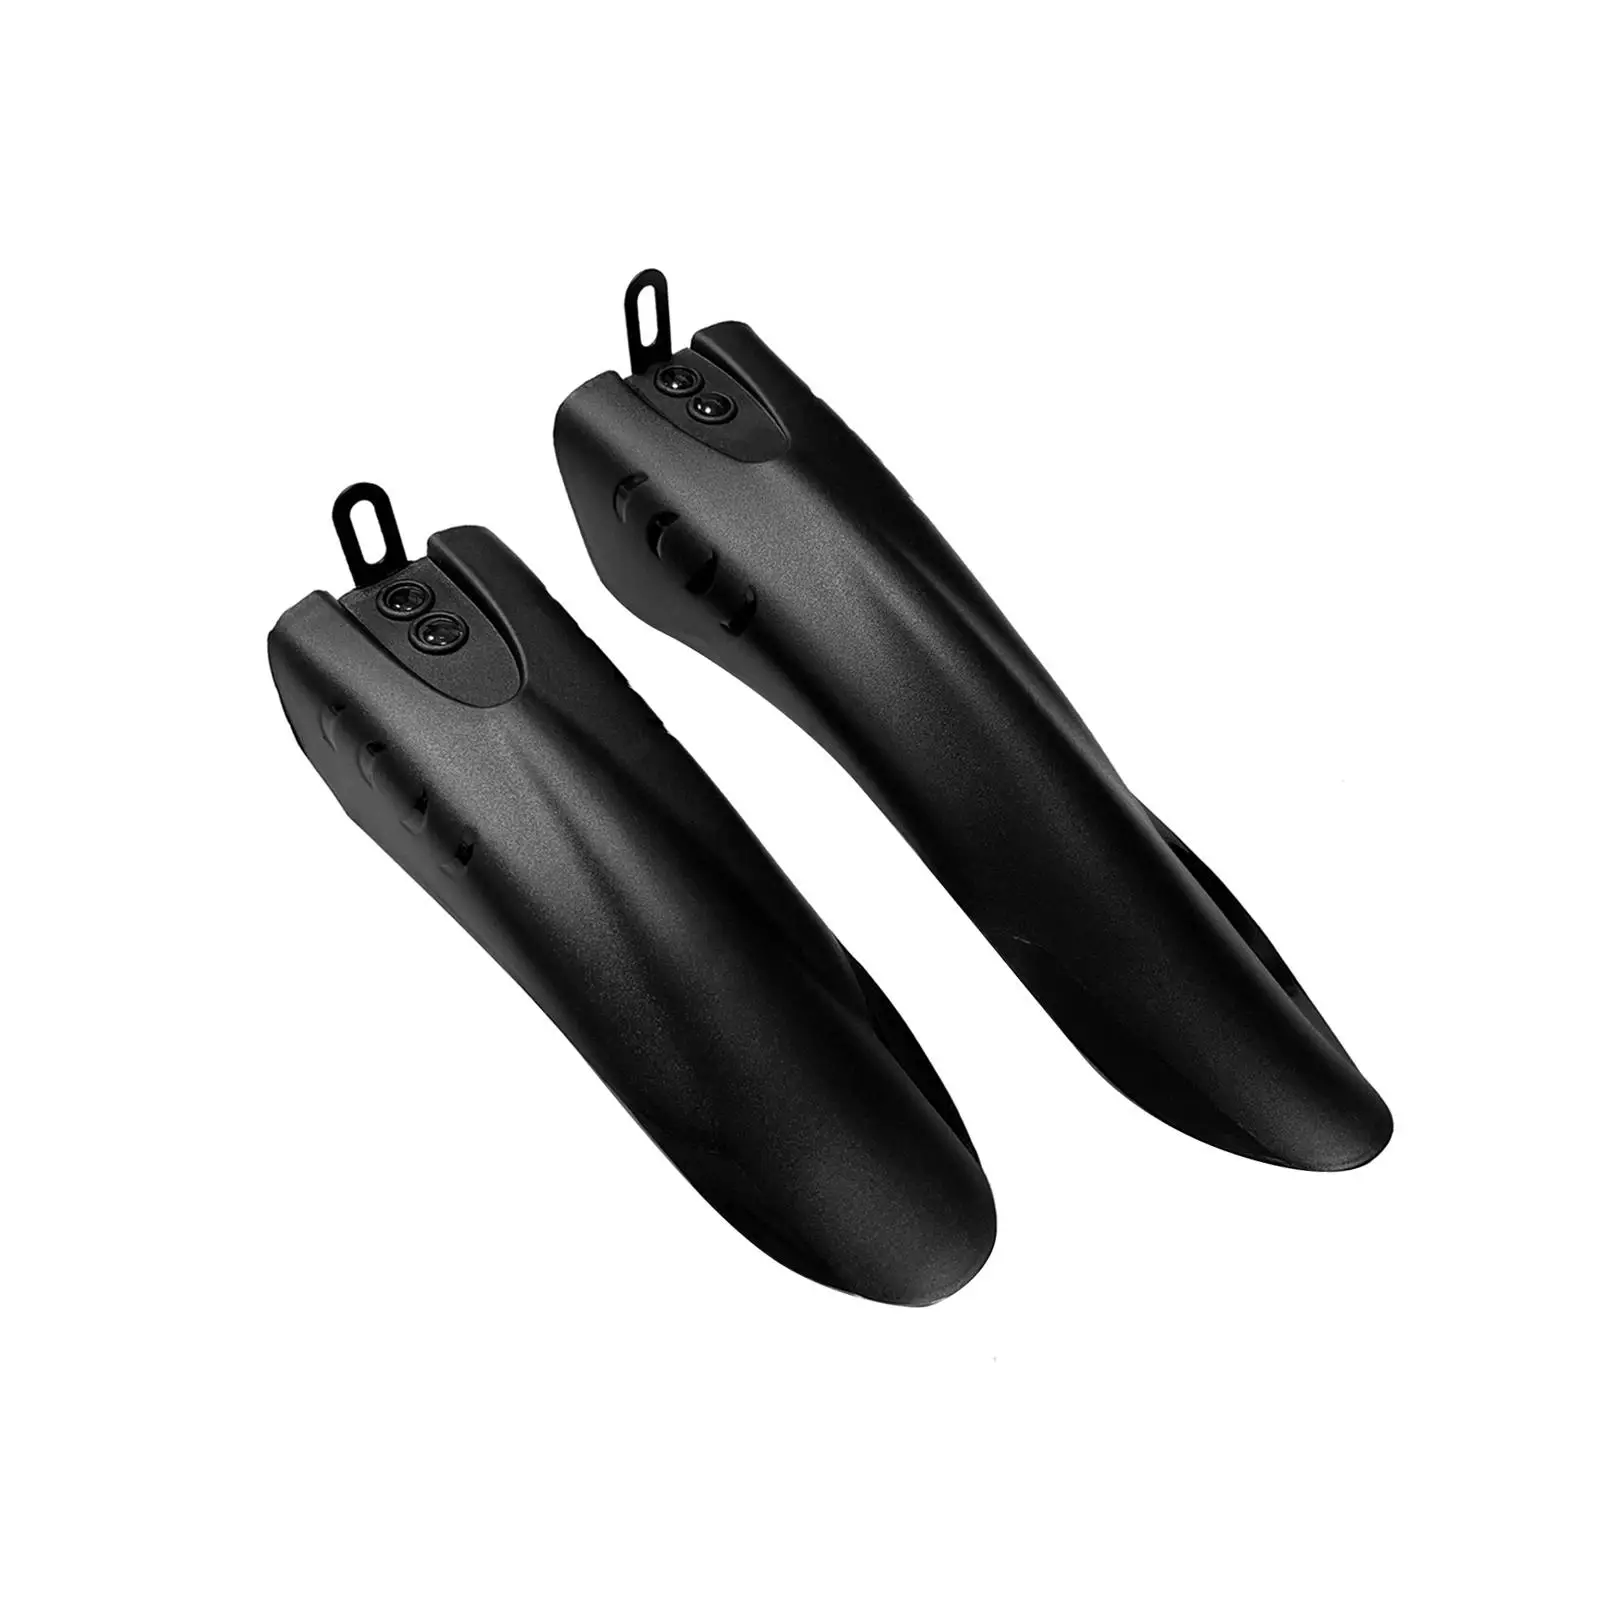 Mountain Bike Mudguard Set Mudflap Replace Accs Components Practical Mud Guard Fenders for Outdoor Sports